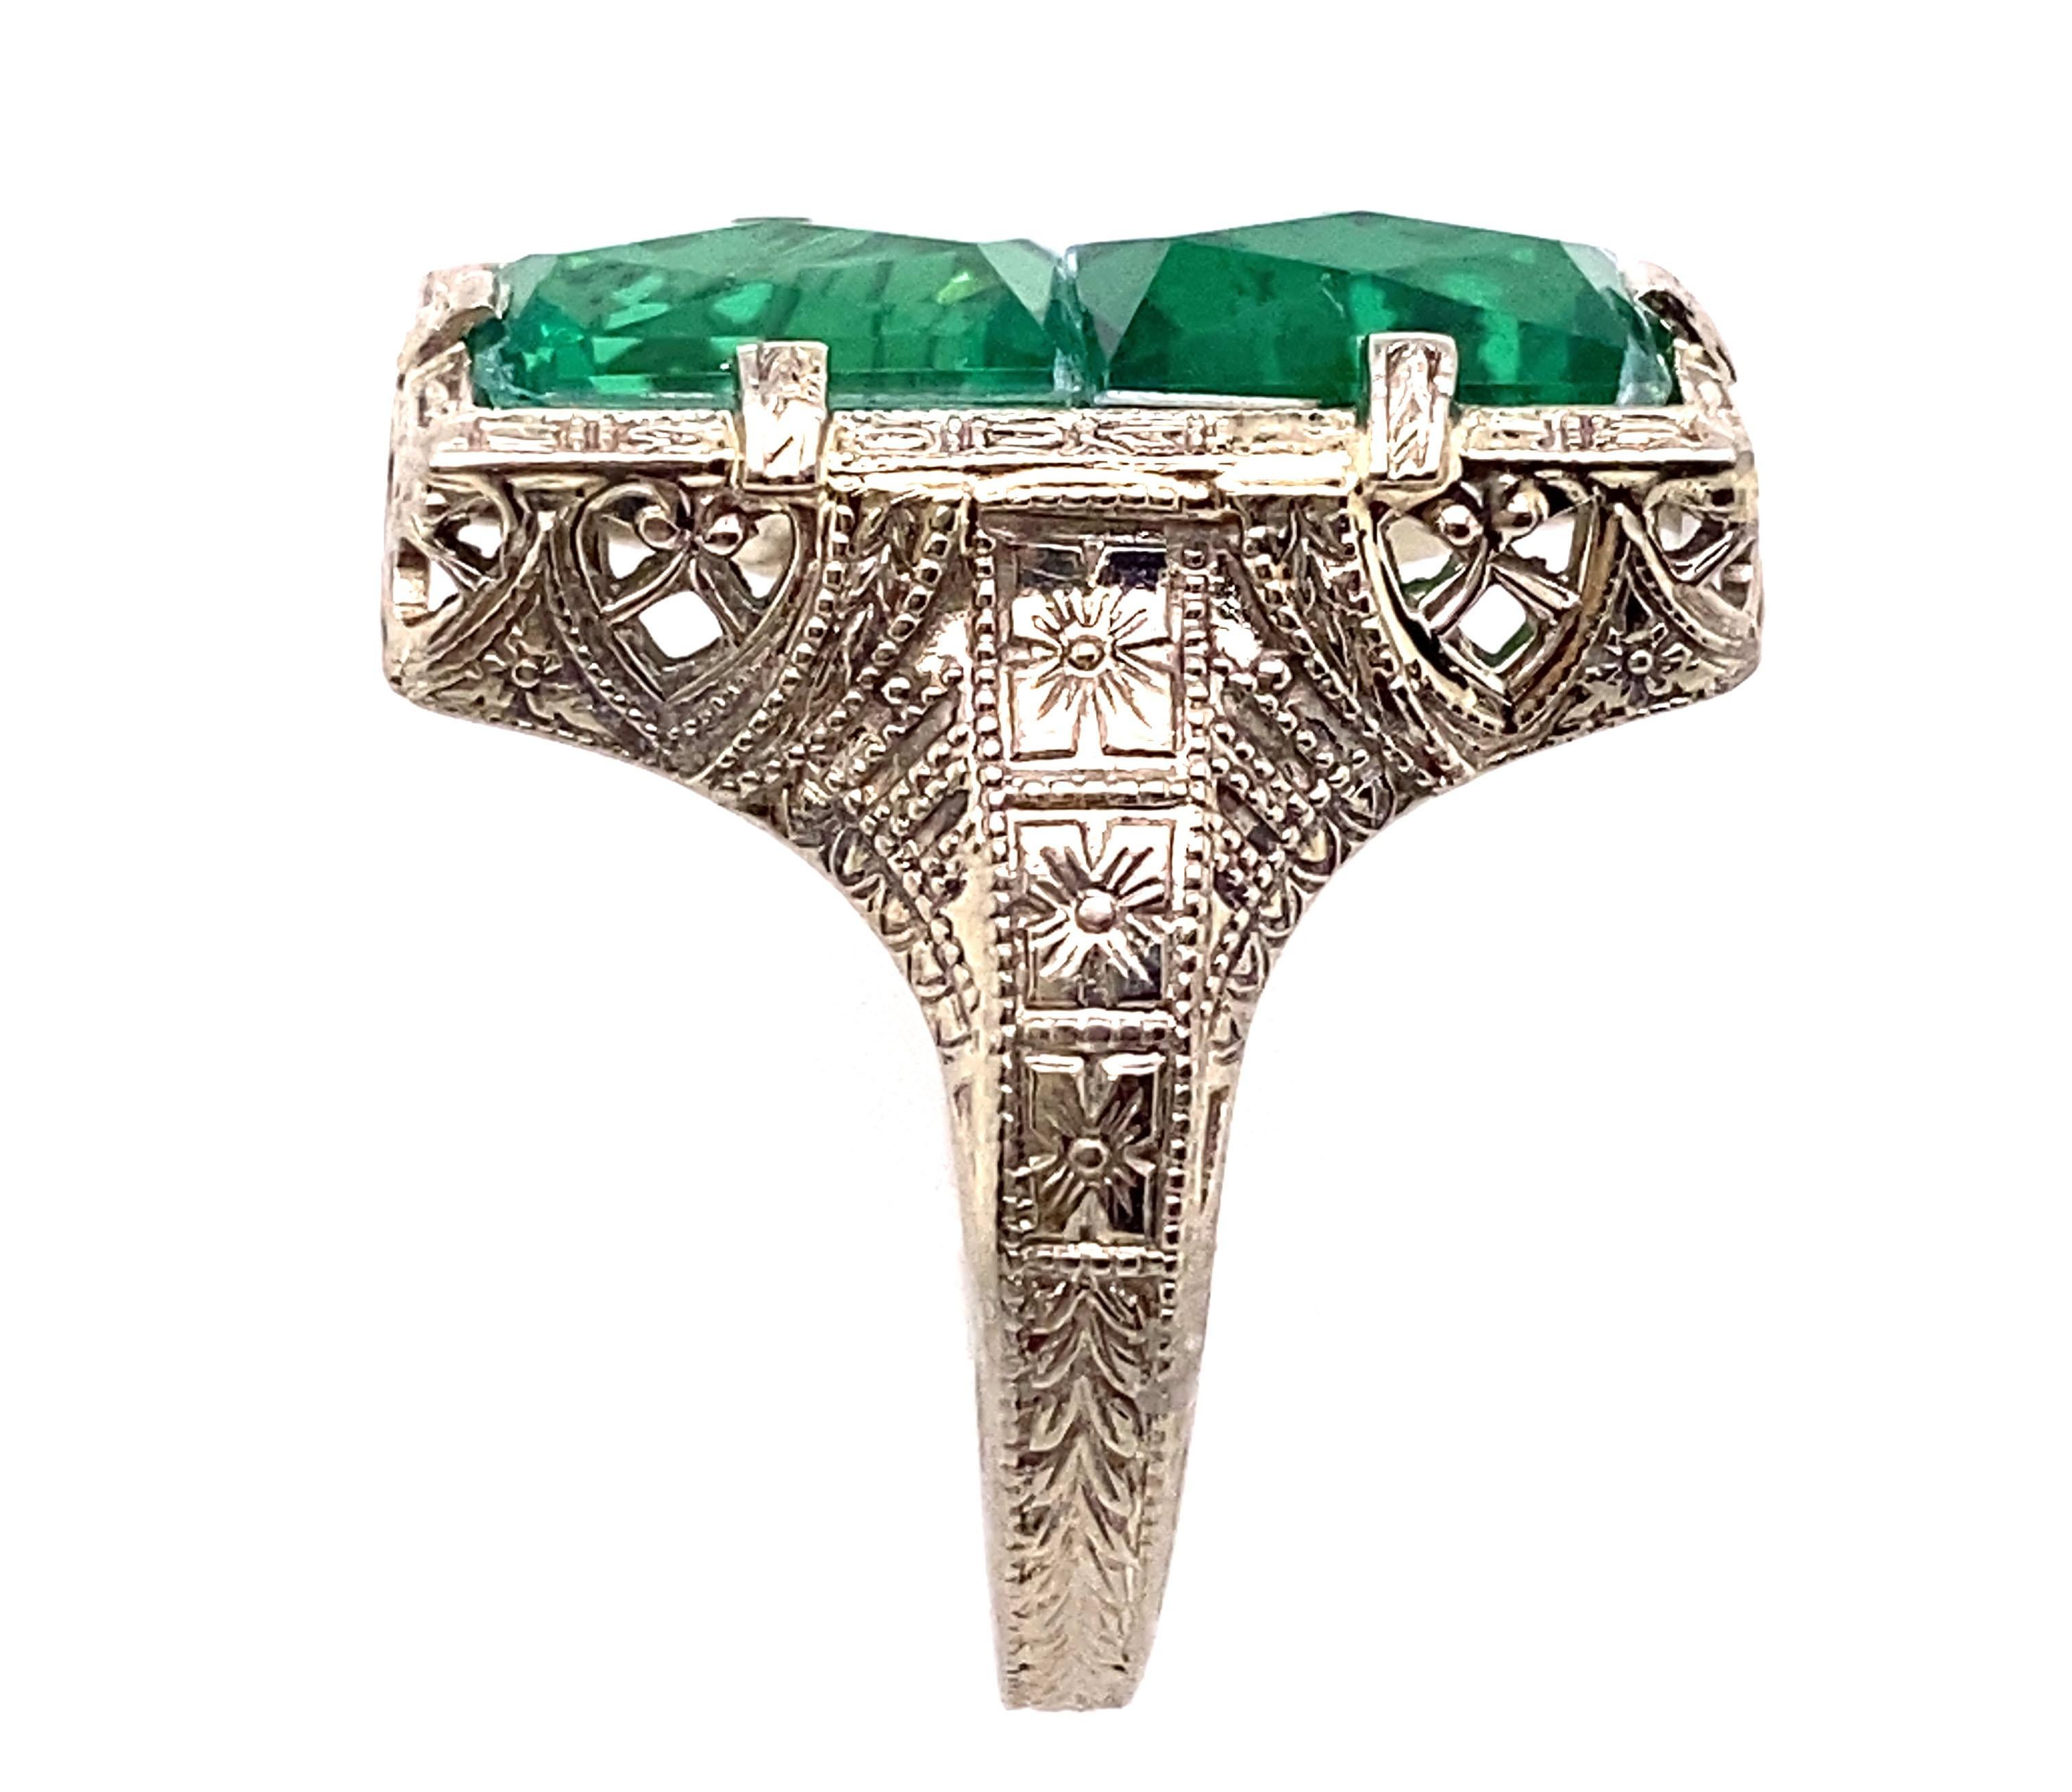 Vintage Emerald Cocktail Ring 3ct Antique 14K White Gold Art Deco Flowers


Featuring 2 Lab Grown Rectangular French Cut Emerald Gemstones Totaling 3.00ct

Circa 1920's

The Art Deco Era in Jewelry Design

Genuine Antique; Not a